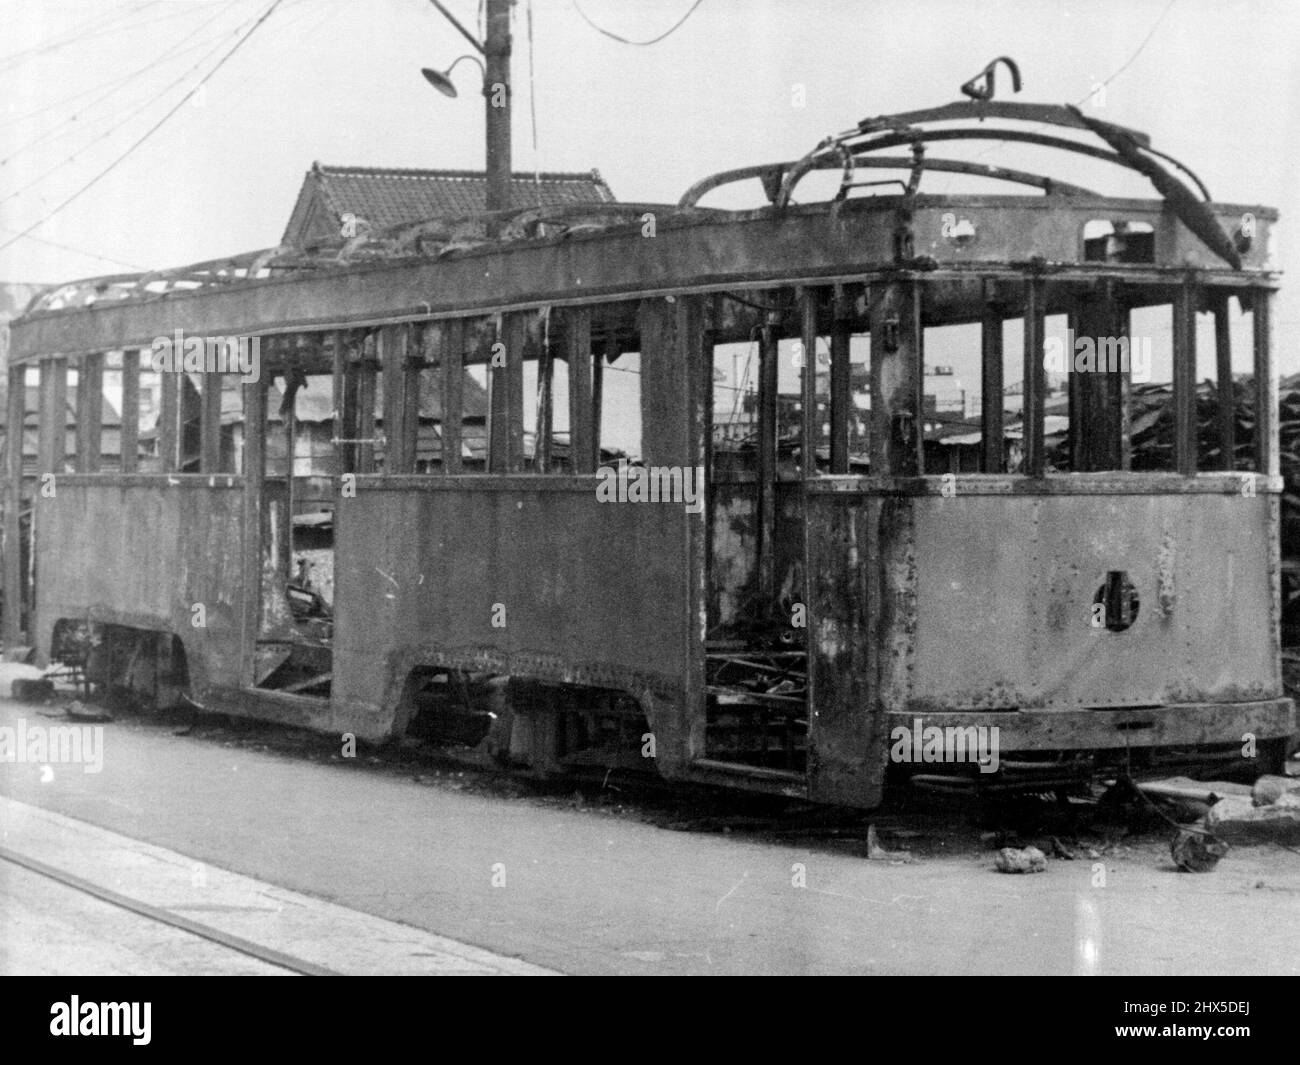 A badly battered electric tram car in Yokahama. This was one of many cars made unserviceable by Allied air raids. Although trains and trams were running when the Allied troops entered the city, the transport system was in a bad condition, and many of the vehicles were worn out. September 10, 1945. (Photo by Australian Official Photo). Stock Photo